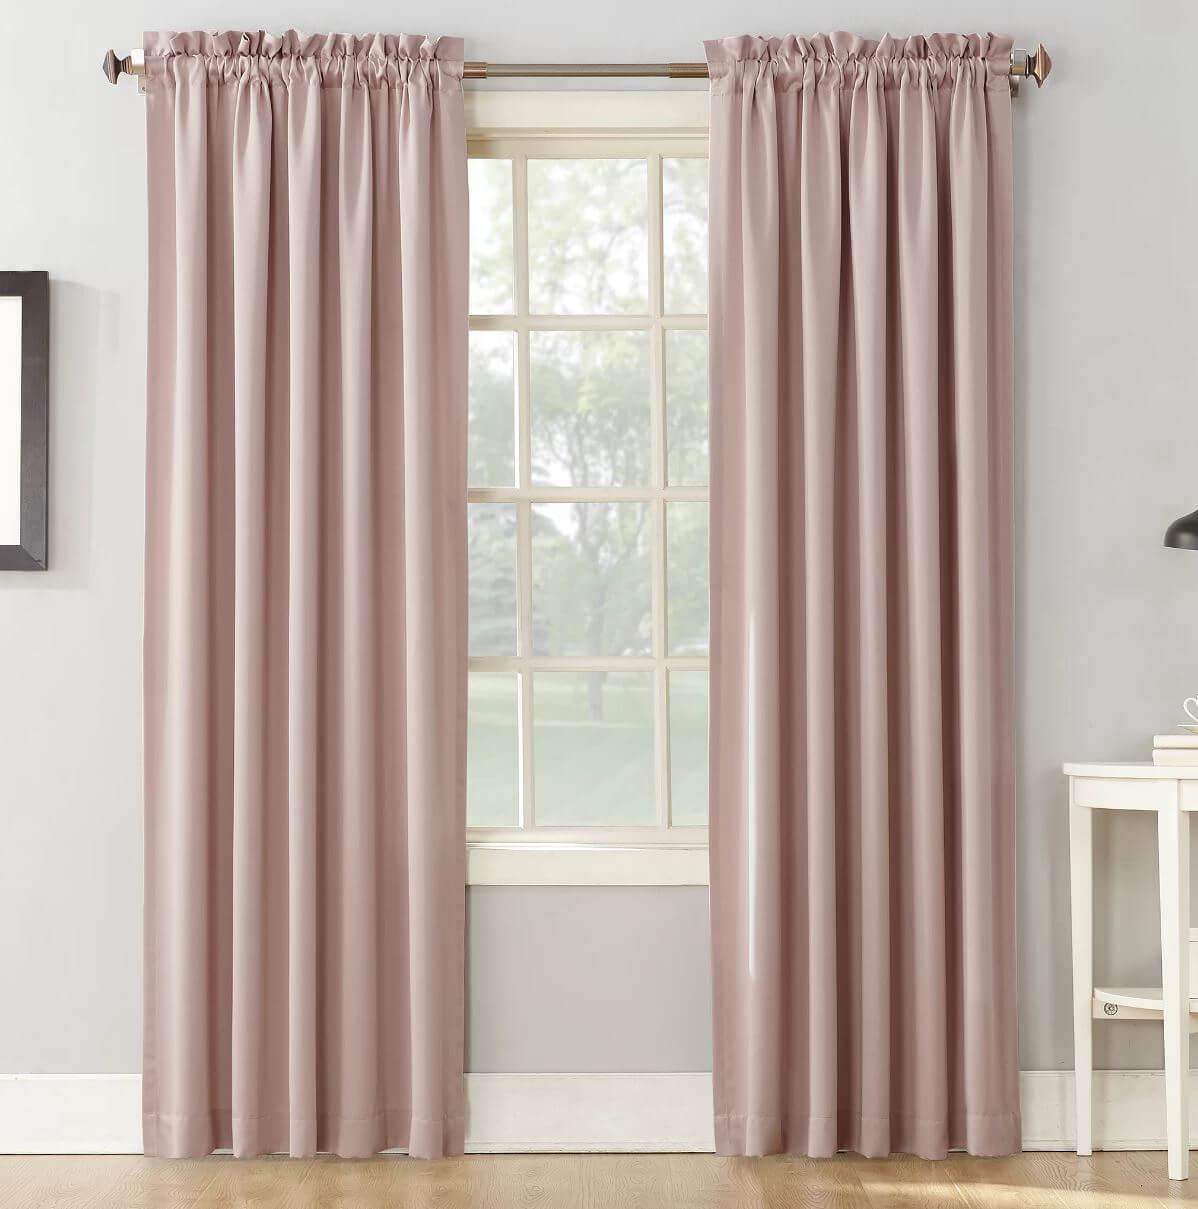 Polyester curtains